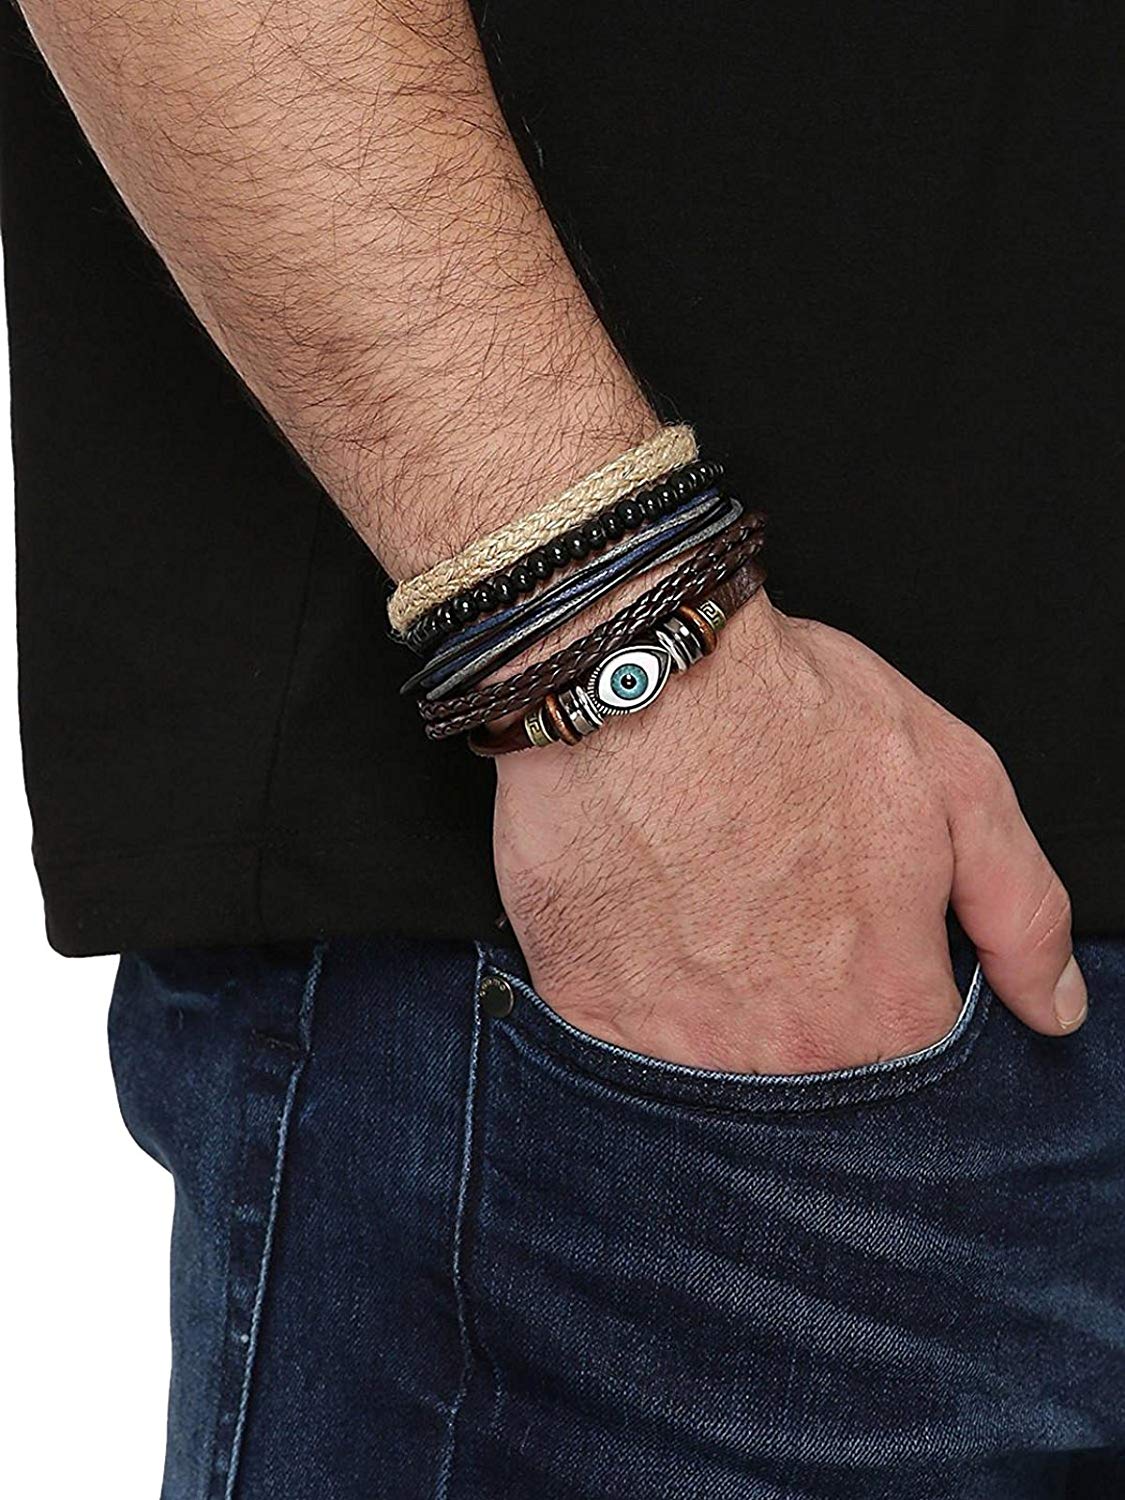 image for Fashion Genuine Leather Bracelet Multi-color Wraps Casual Skin Friendly Bracelets for Men Boys Multi-strand Friendship Bracelets Cuff Casual Party Wear (Set of 4) Size 7.5 Inches